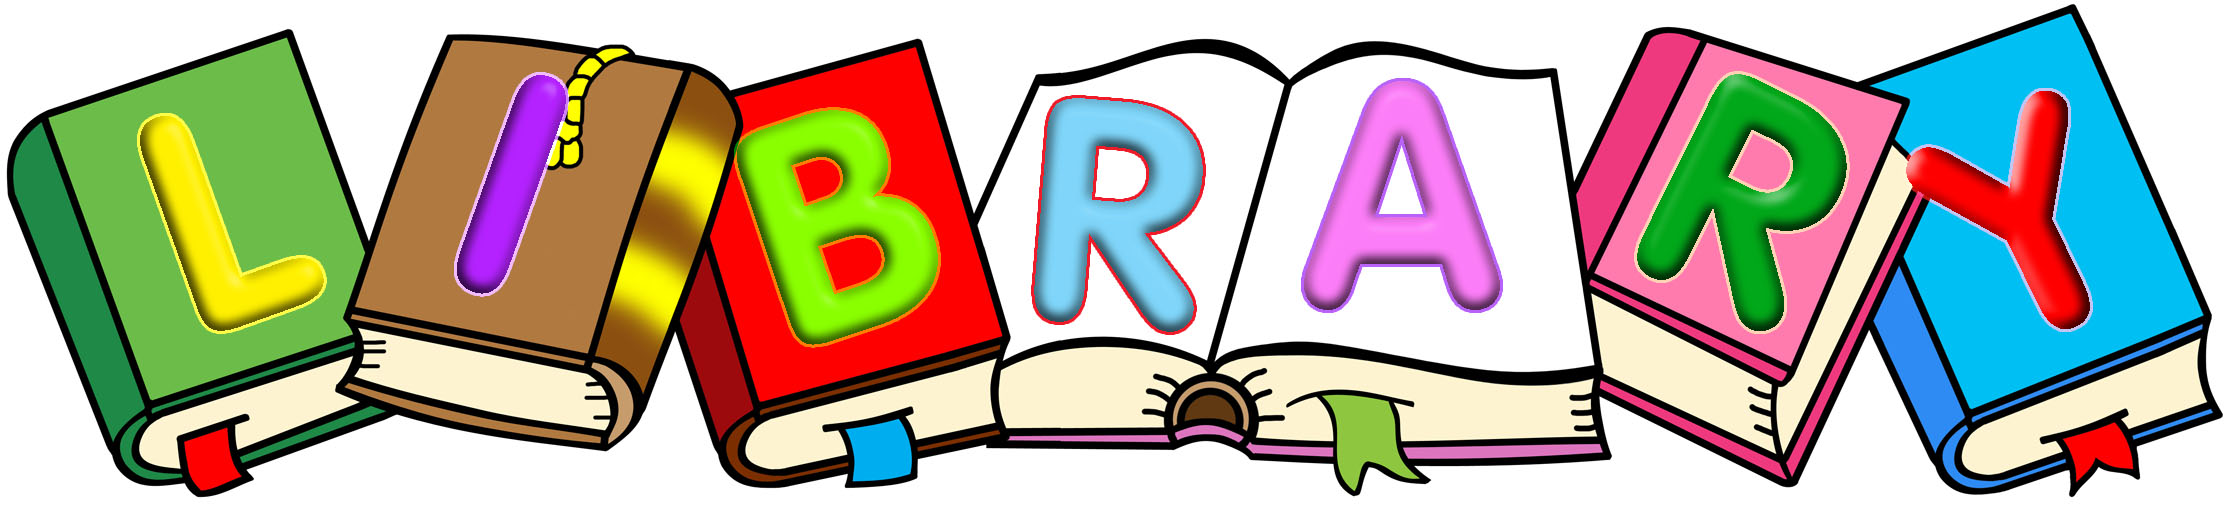 Free Library Cliparts, Download Free Clip Art, Free Clip Art